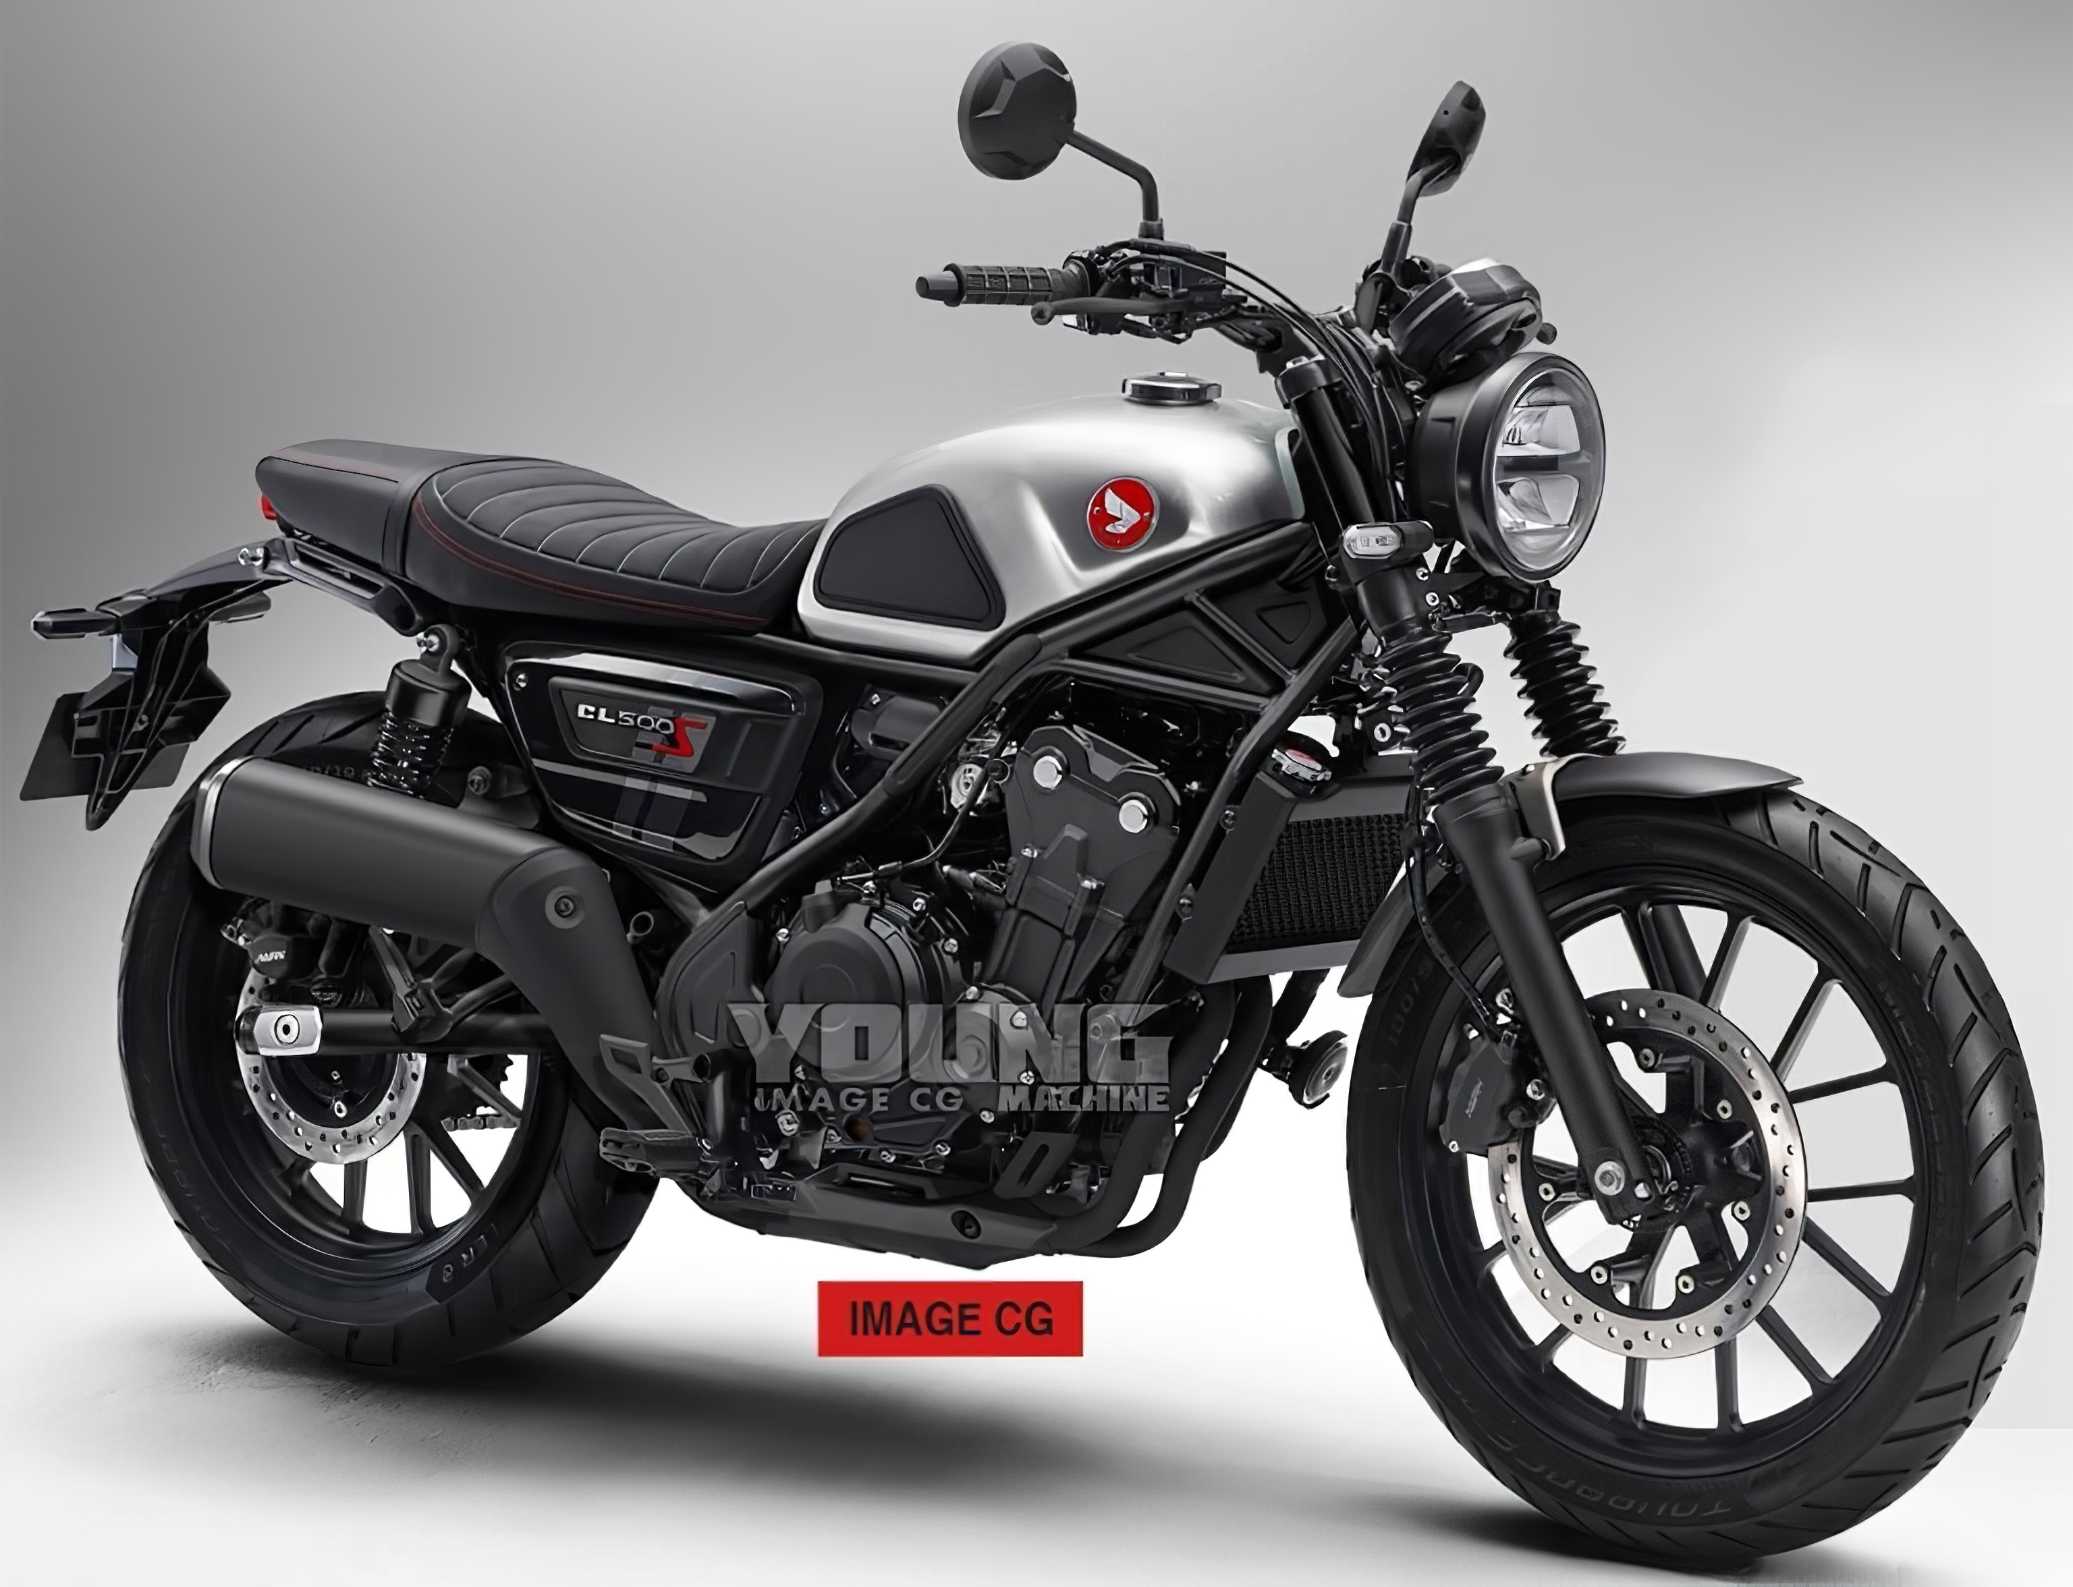 Is a new Honda CL500 Scrambler on the way?
- also in the MOTORCYCLES.NEWS APP